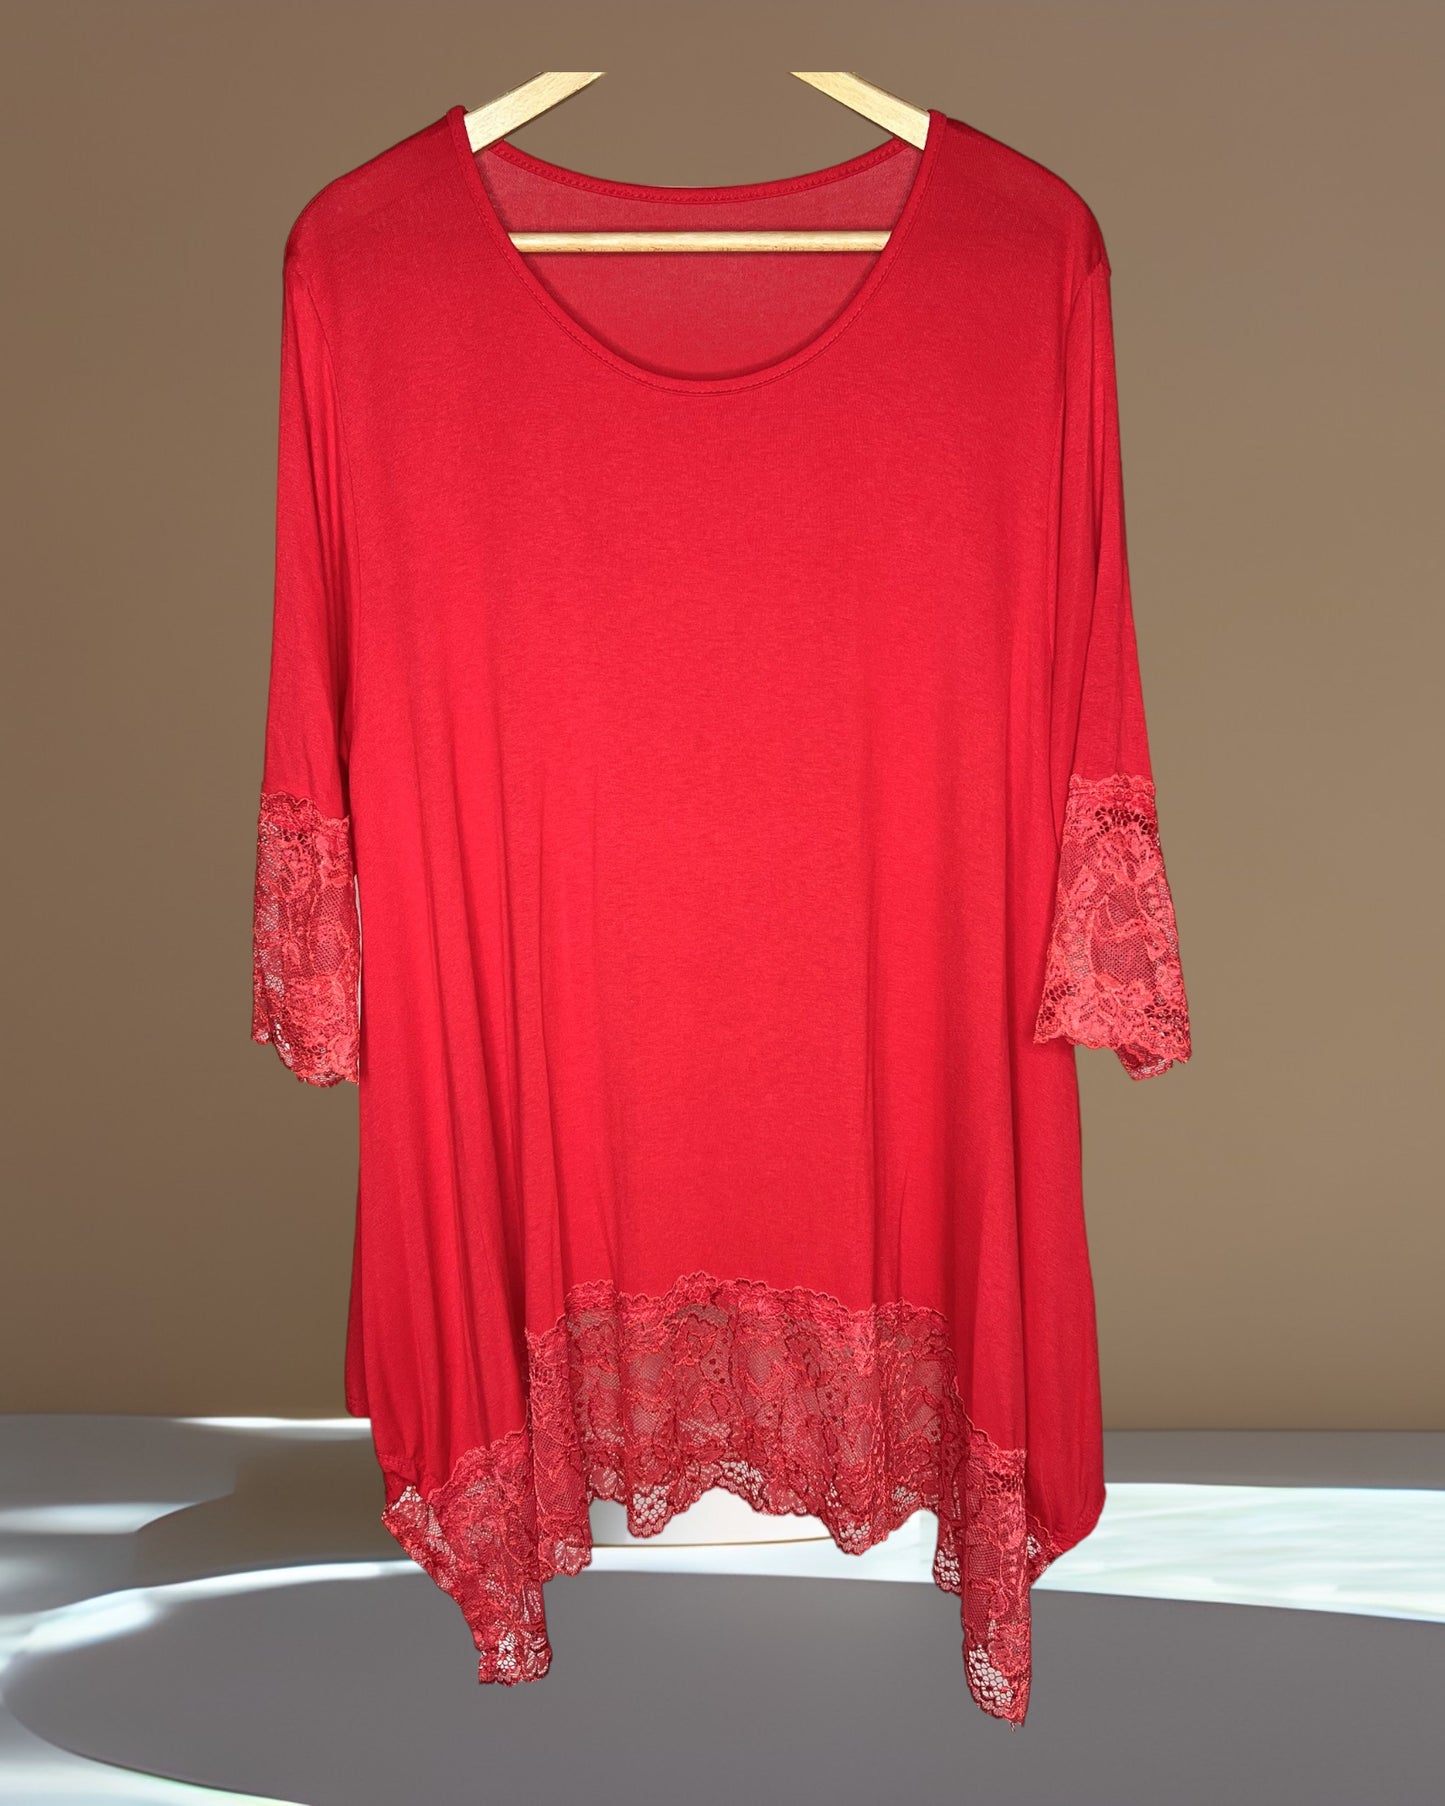 CINDY - TOP ROUGE TAILLE 46 A 56/58